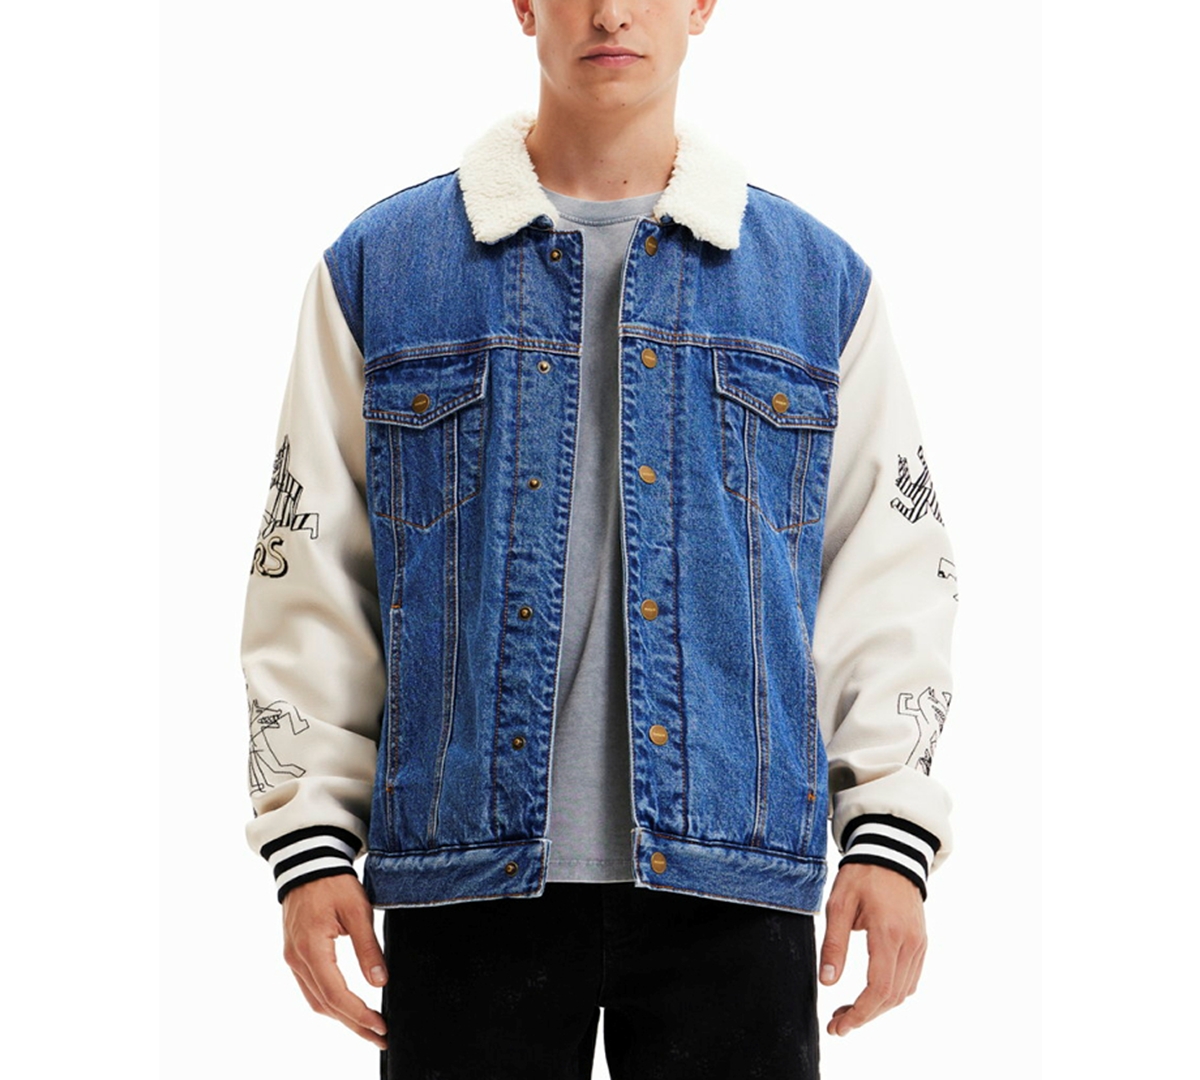 Desigual Men's Relaxed-Fit Denim Jacket With Varsity-Style Sleeves